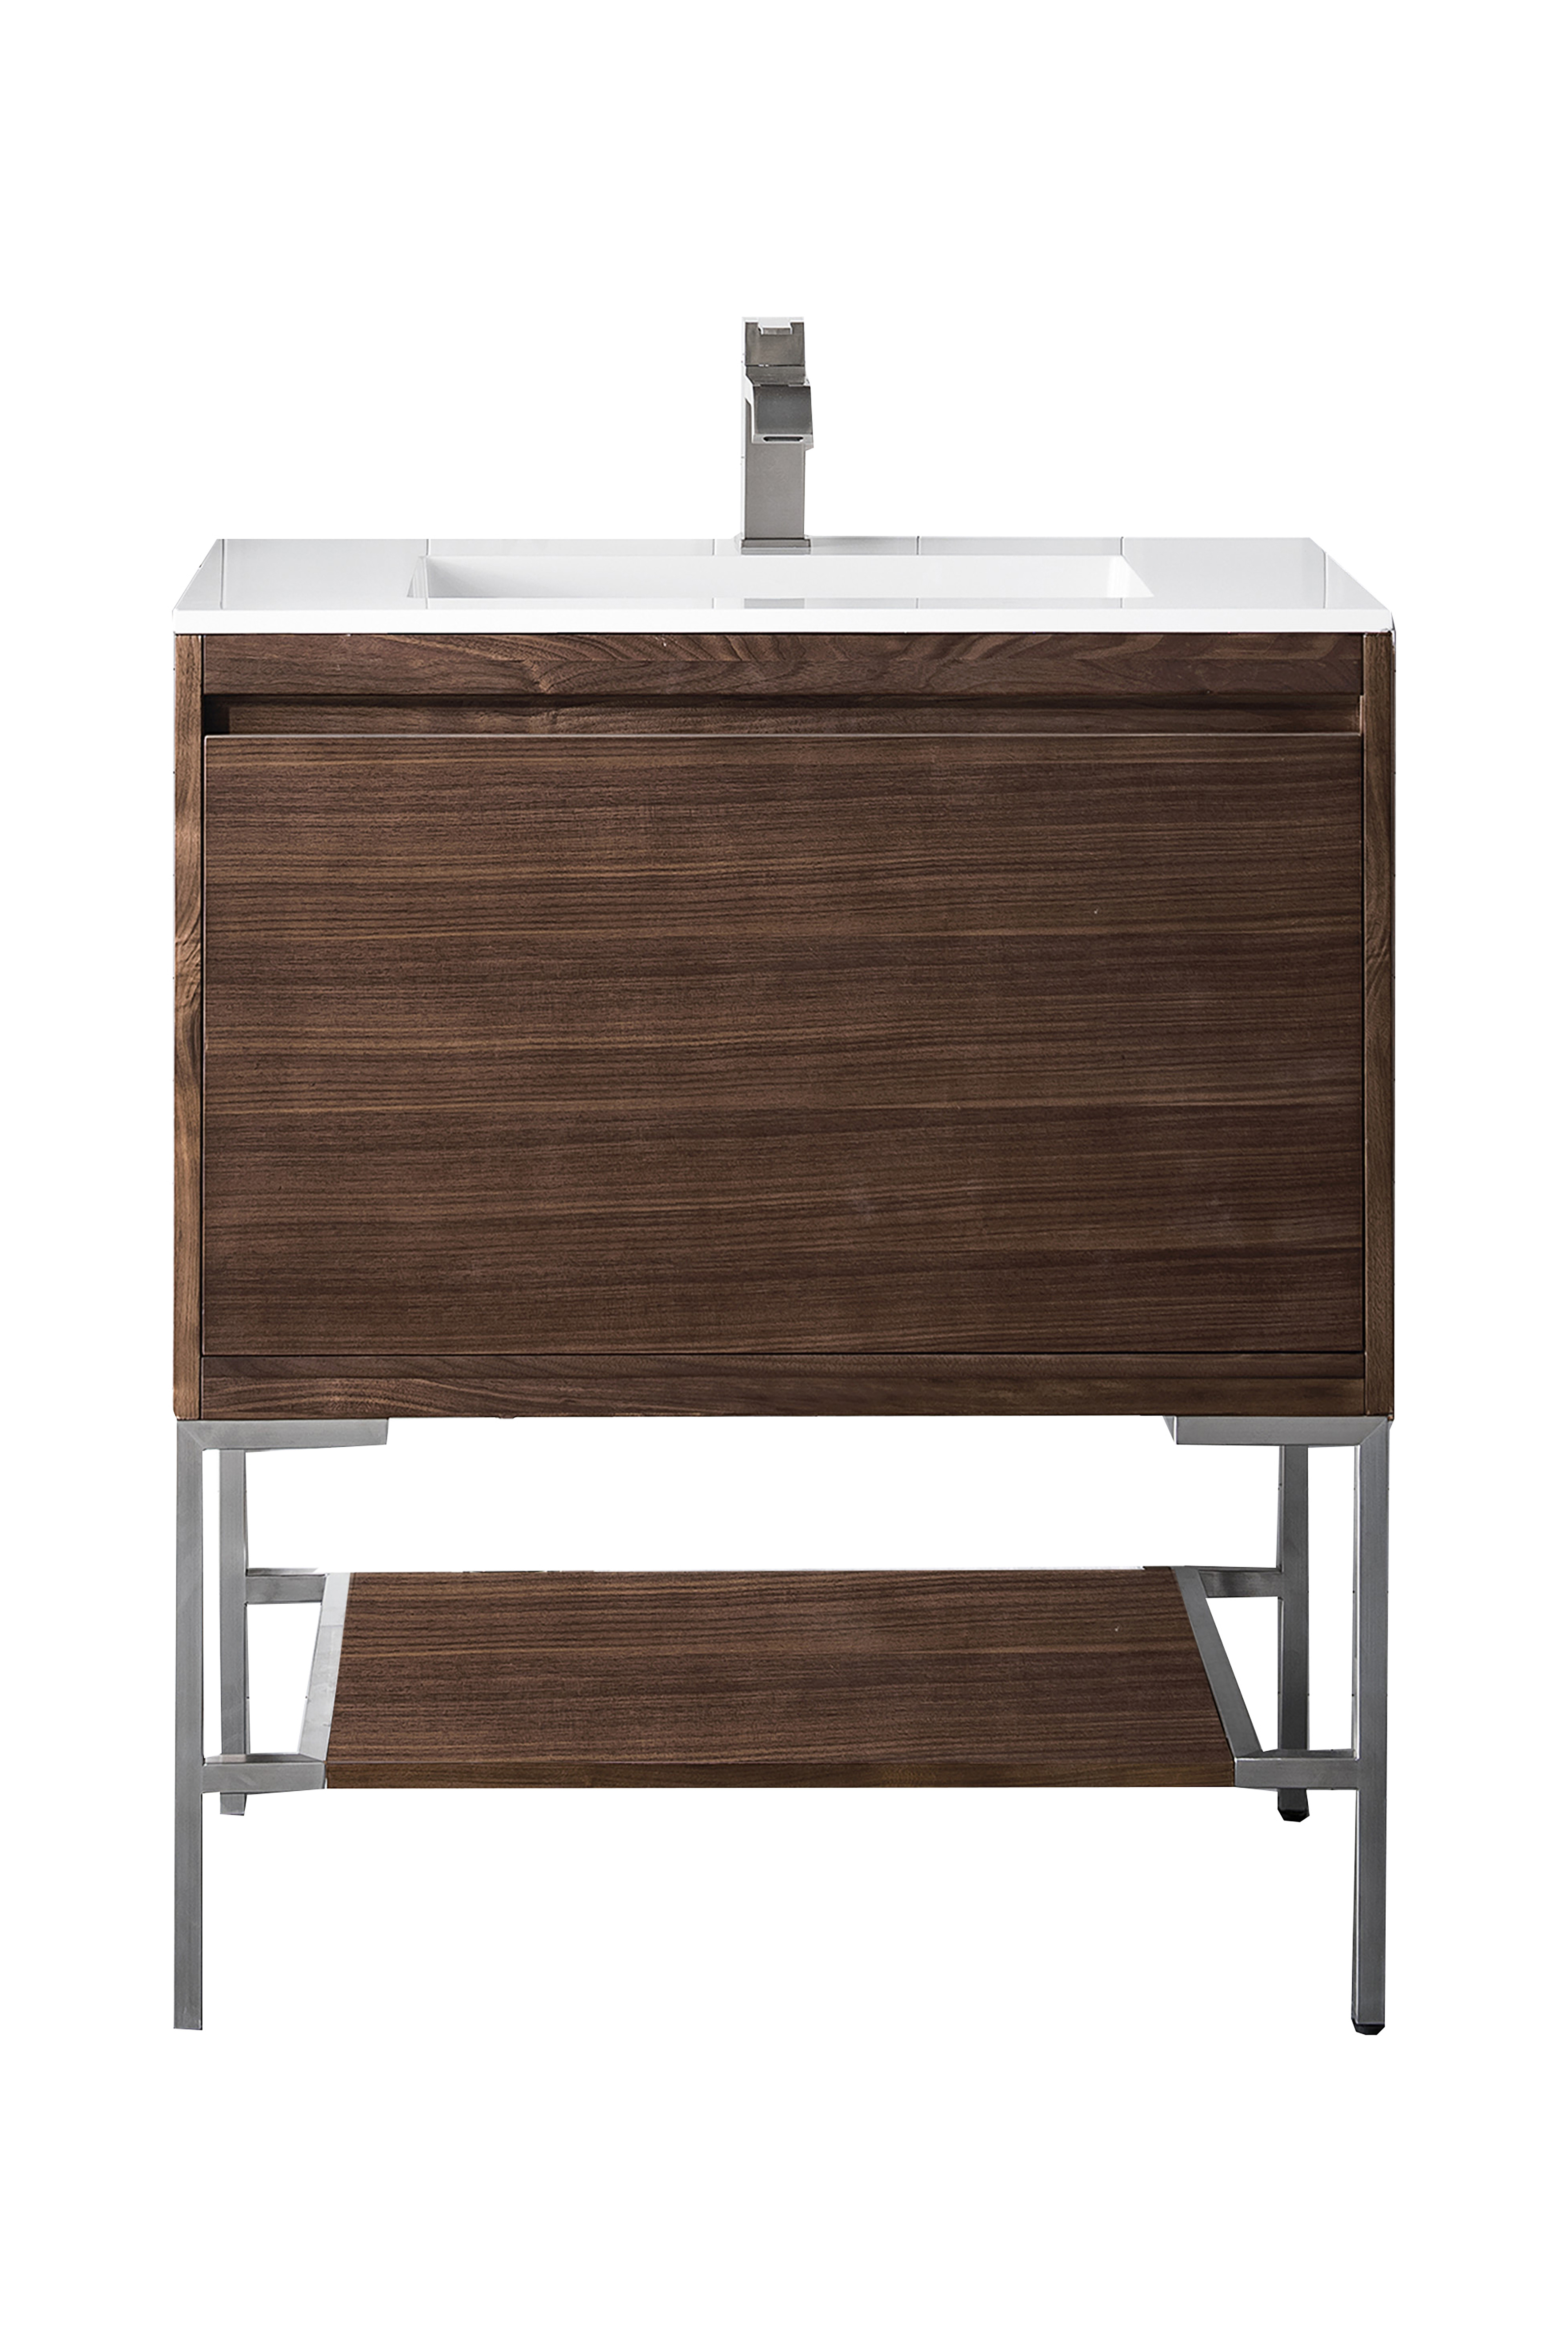 James Martin 801V31.5WLTBNKGW Milan 31.5" Single Vanity Cabinet, Mid Century Walnut, Brushed Nickel w/Glossy White Composite Top